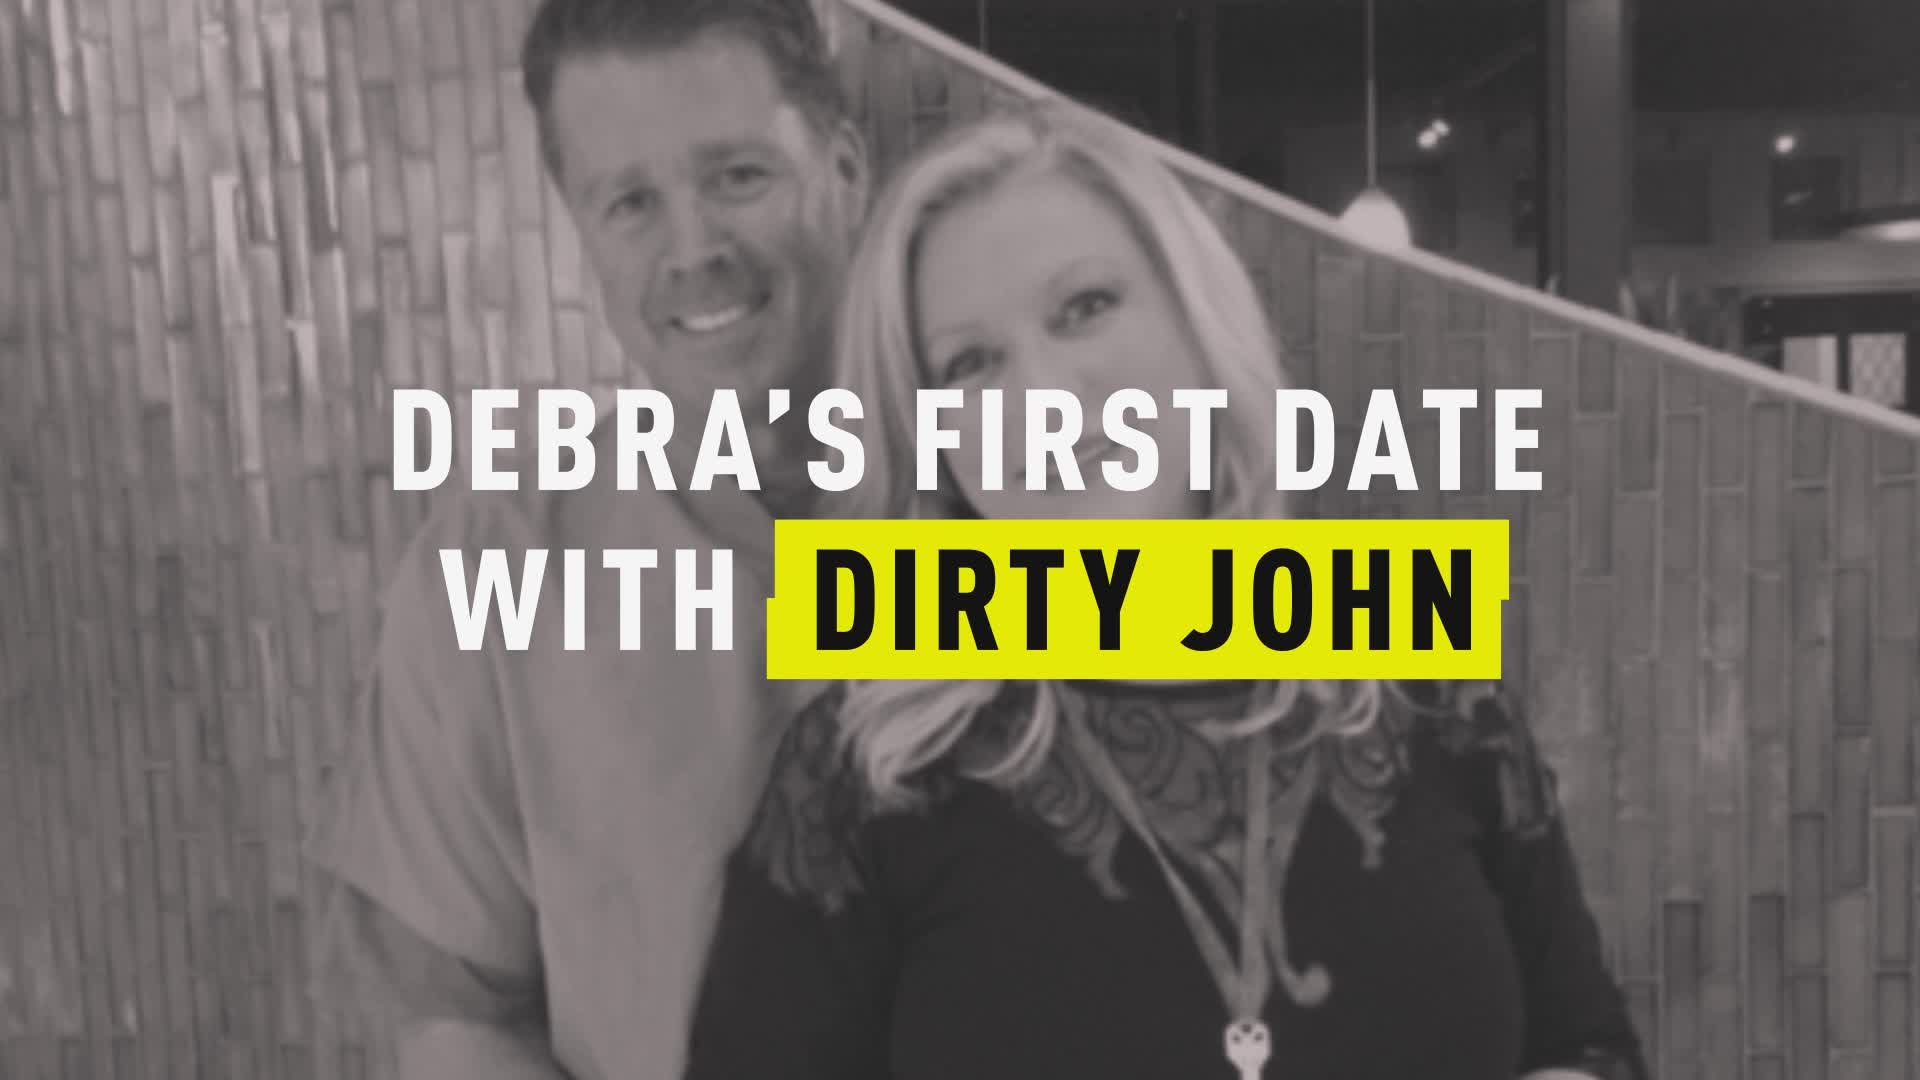 Debra’s First Date With Dirty John